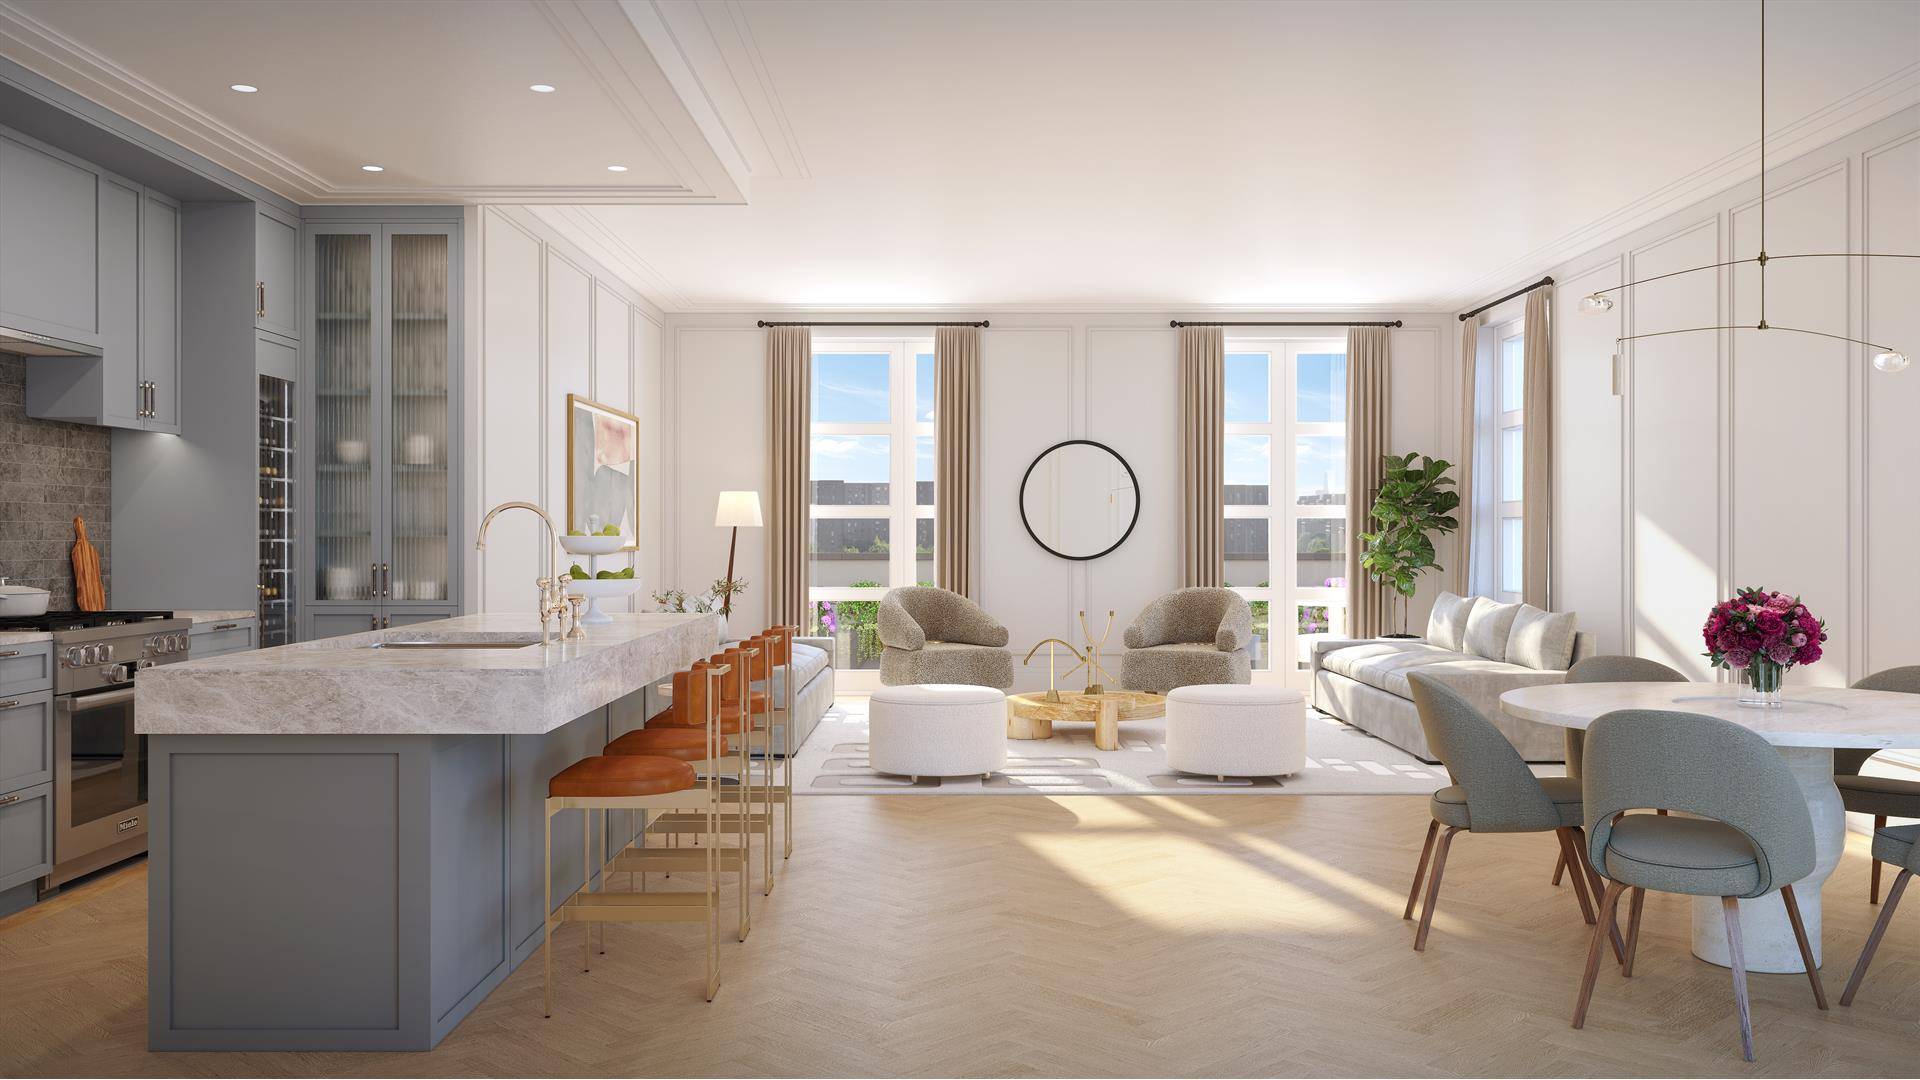 Anticipated Occupancy Q3 2022 Residence 5D at The Edison Gramercy is a 688 square foot one bedroom, one bathroom home with interiors designed by acclaimed firm Paris Forino Interior Design.